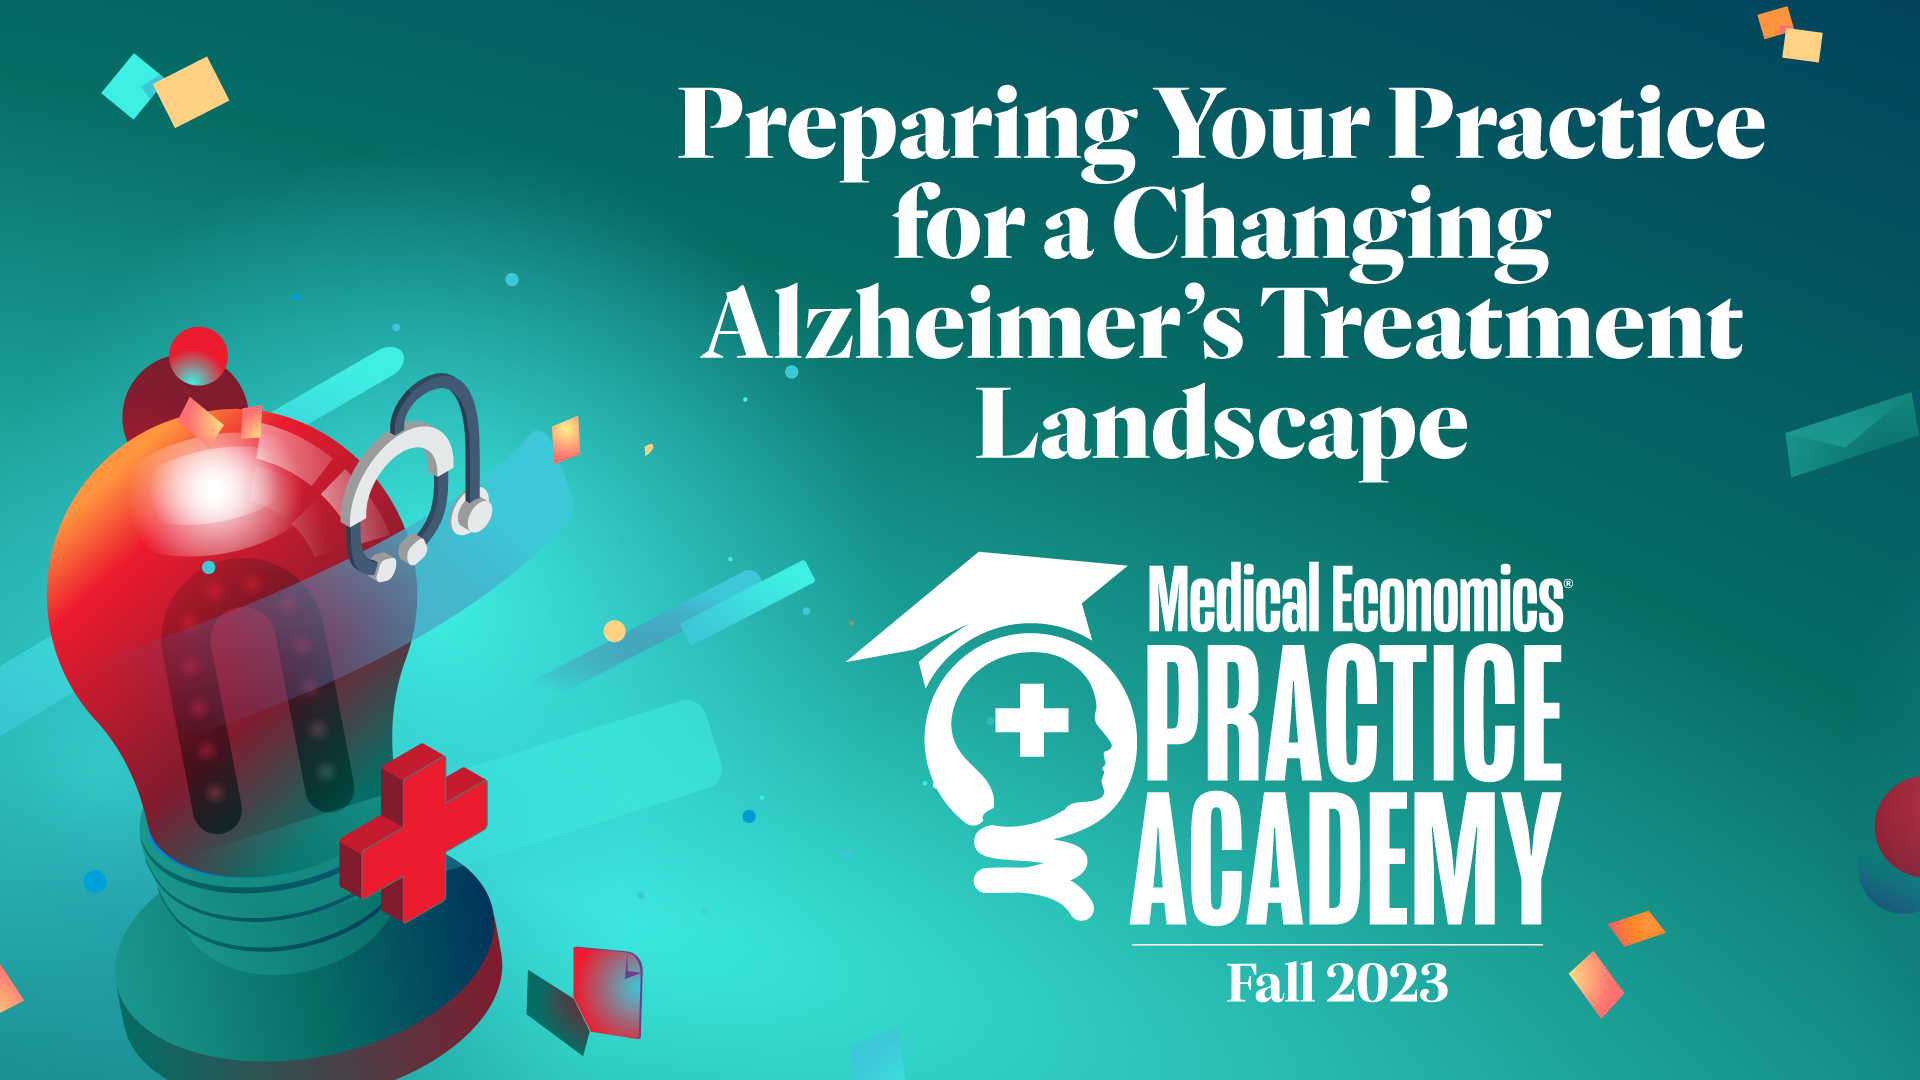 The Changing Alzheimer’s Treatment Landscape - how to prepare your practice